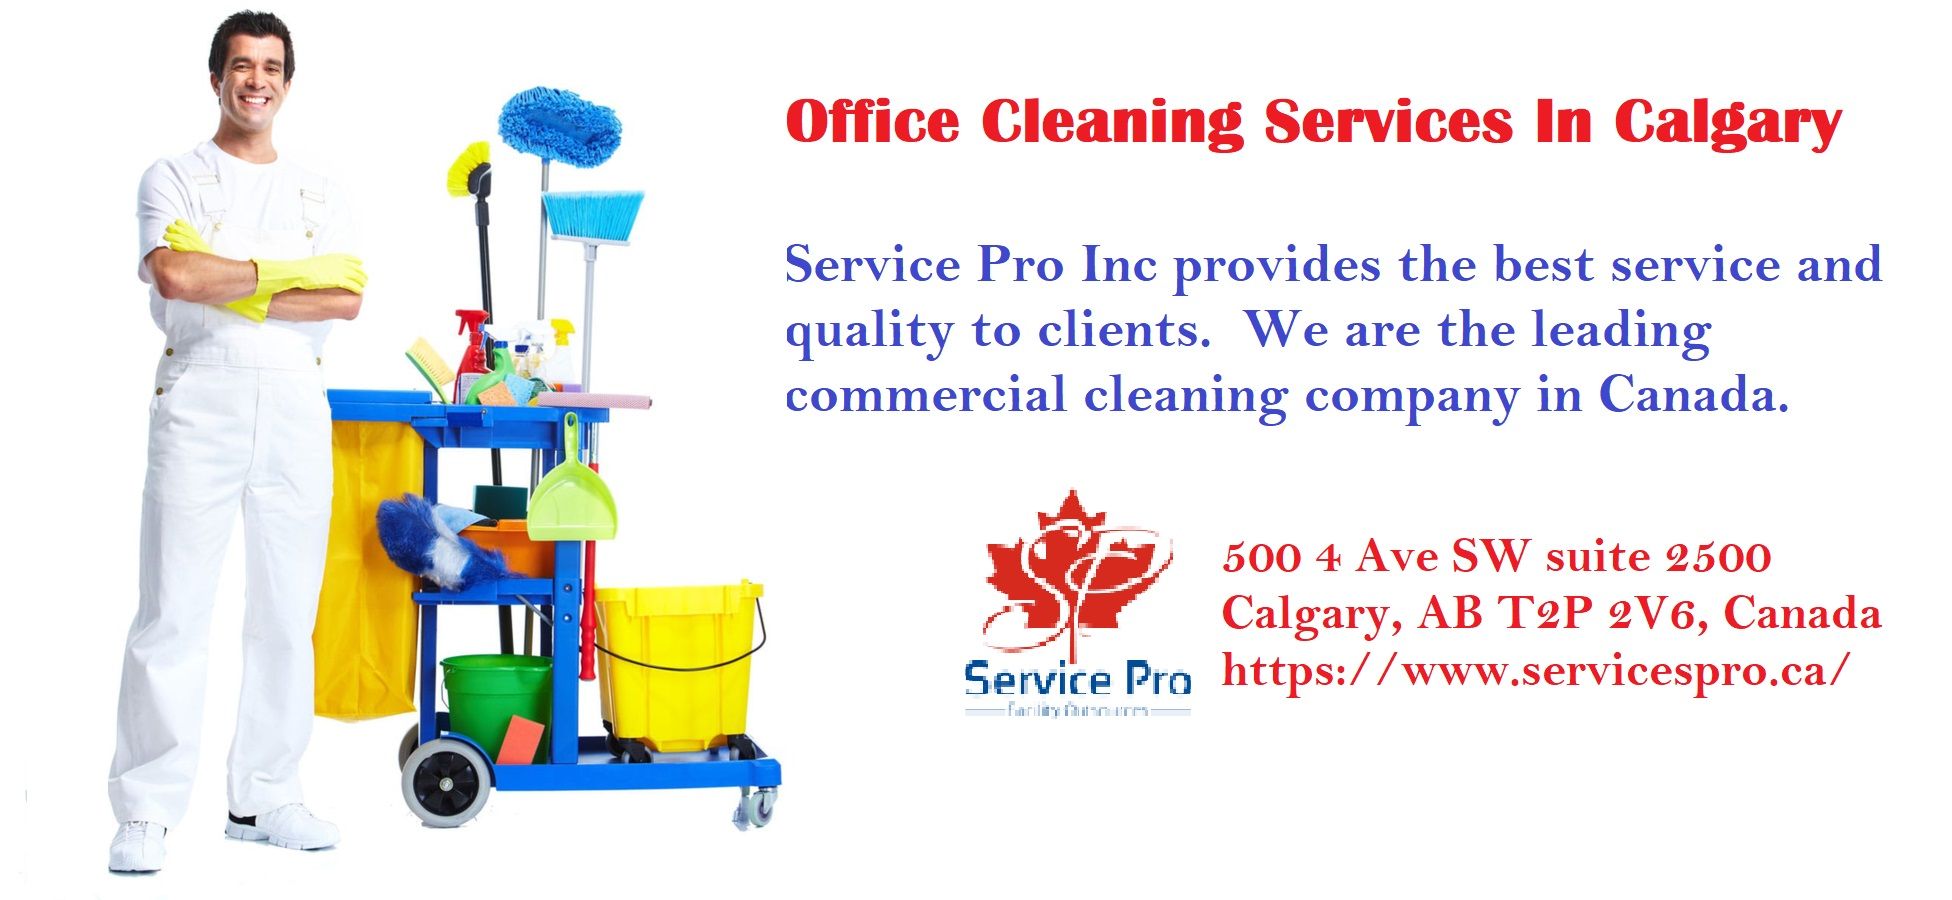 Office Cleaning Services In Calgary | Services Pro